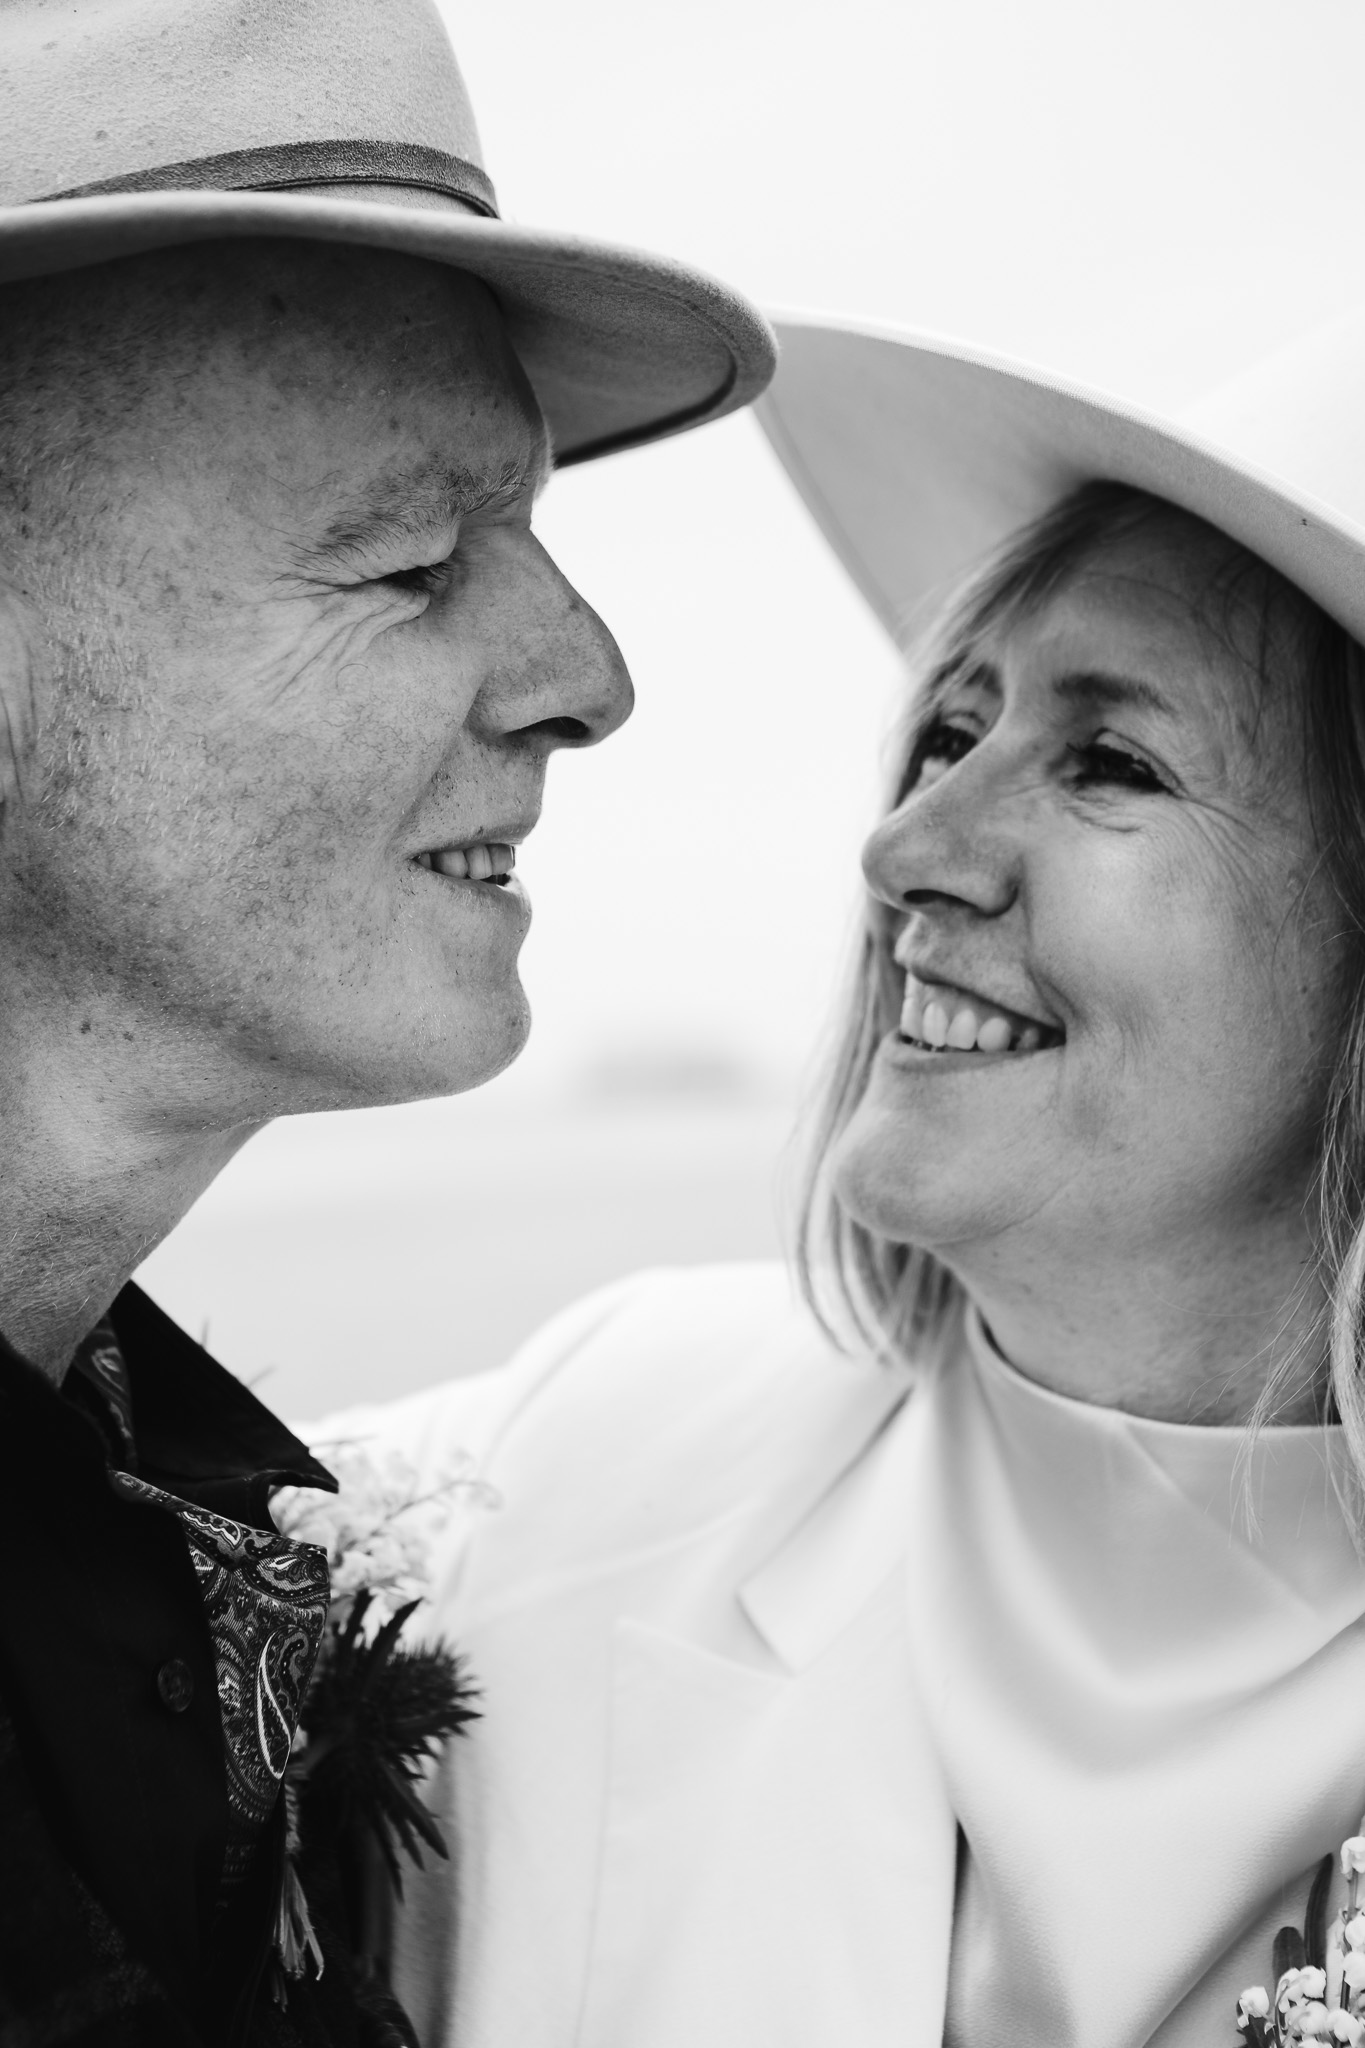 Bride and groom wearing fedoras look at each other and smile during their couple portrait session.